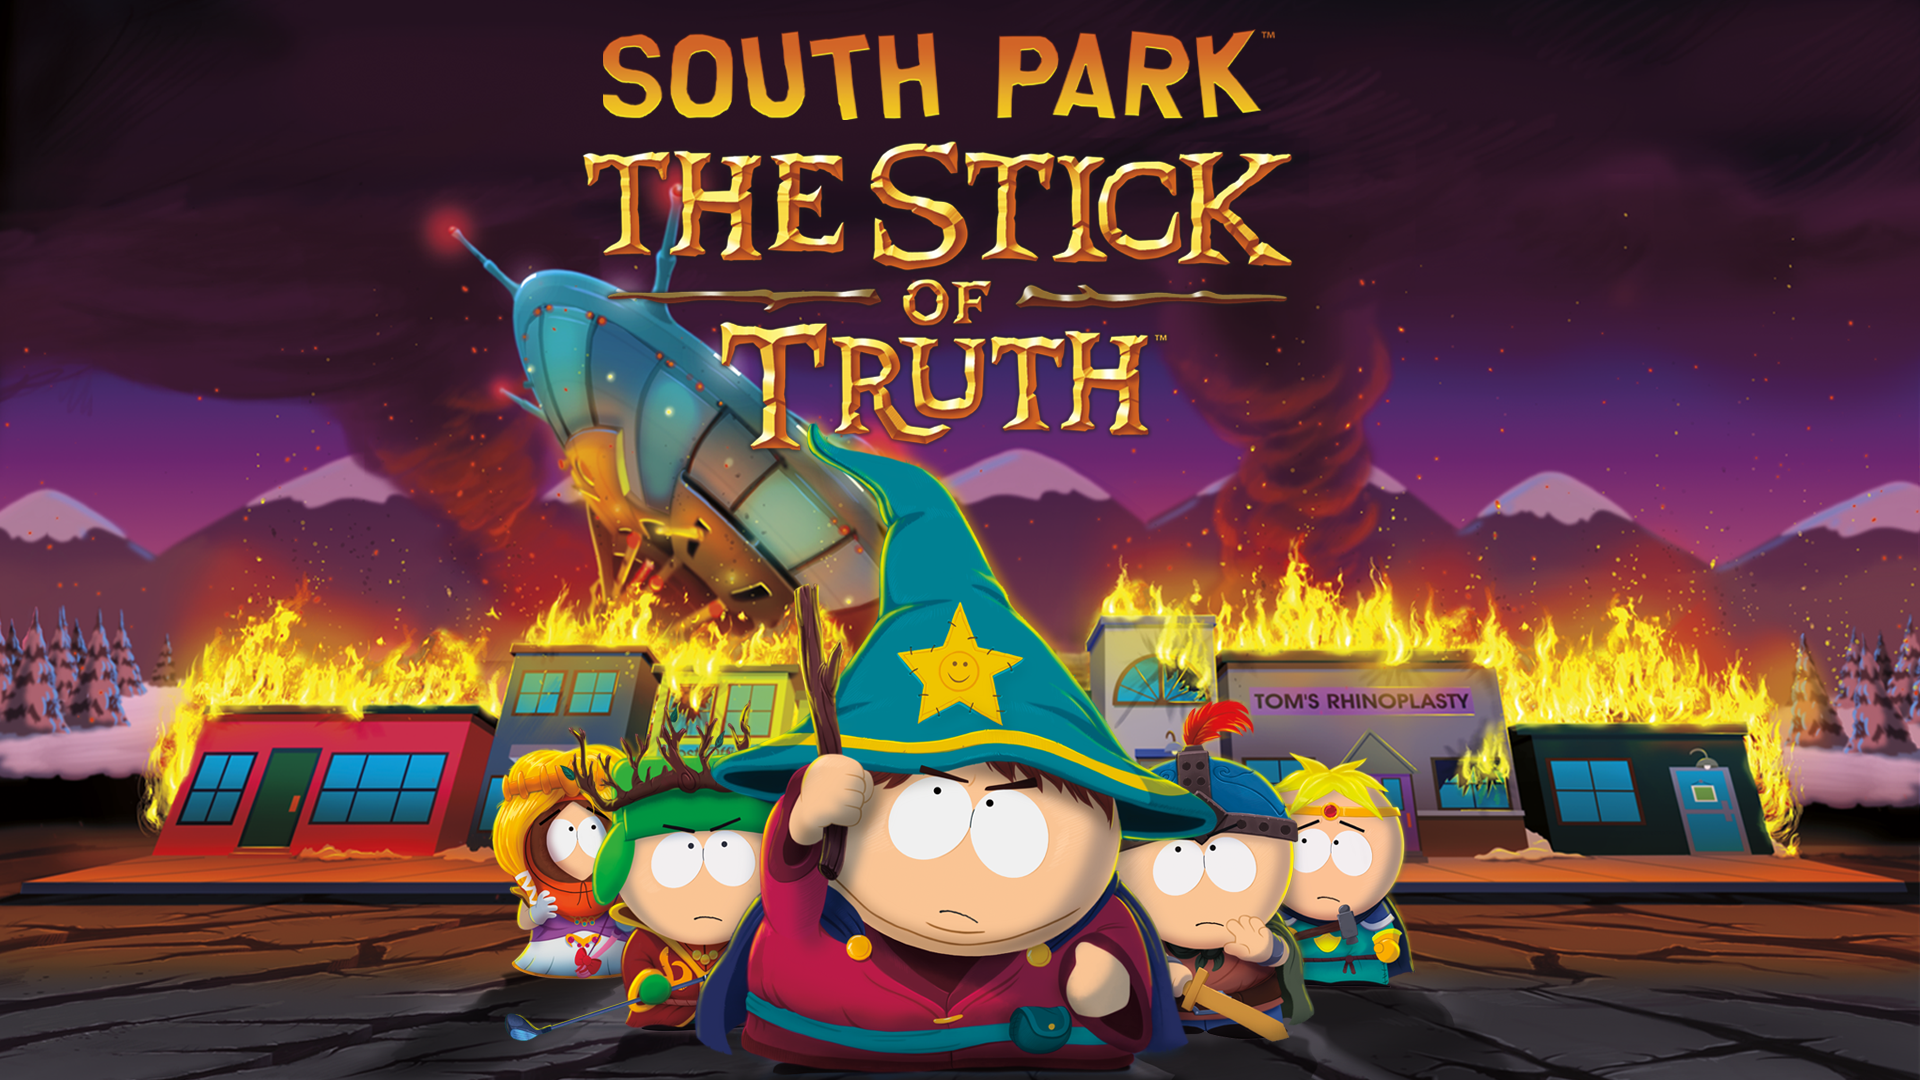 South Park: The Stick of Truth (英文)